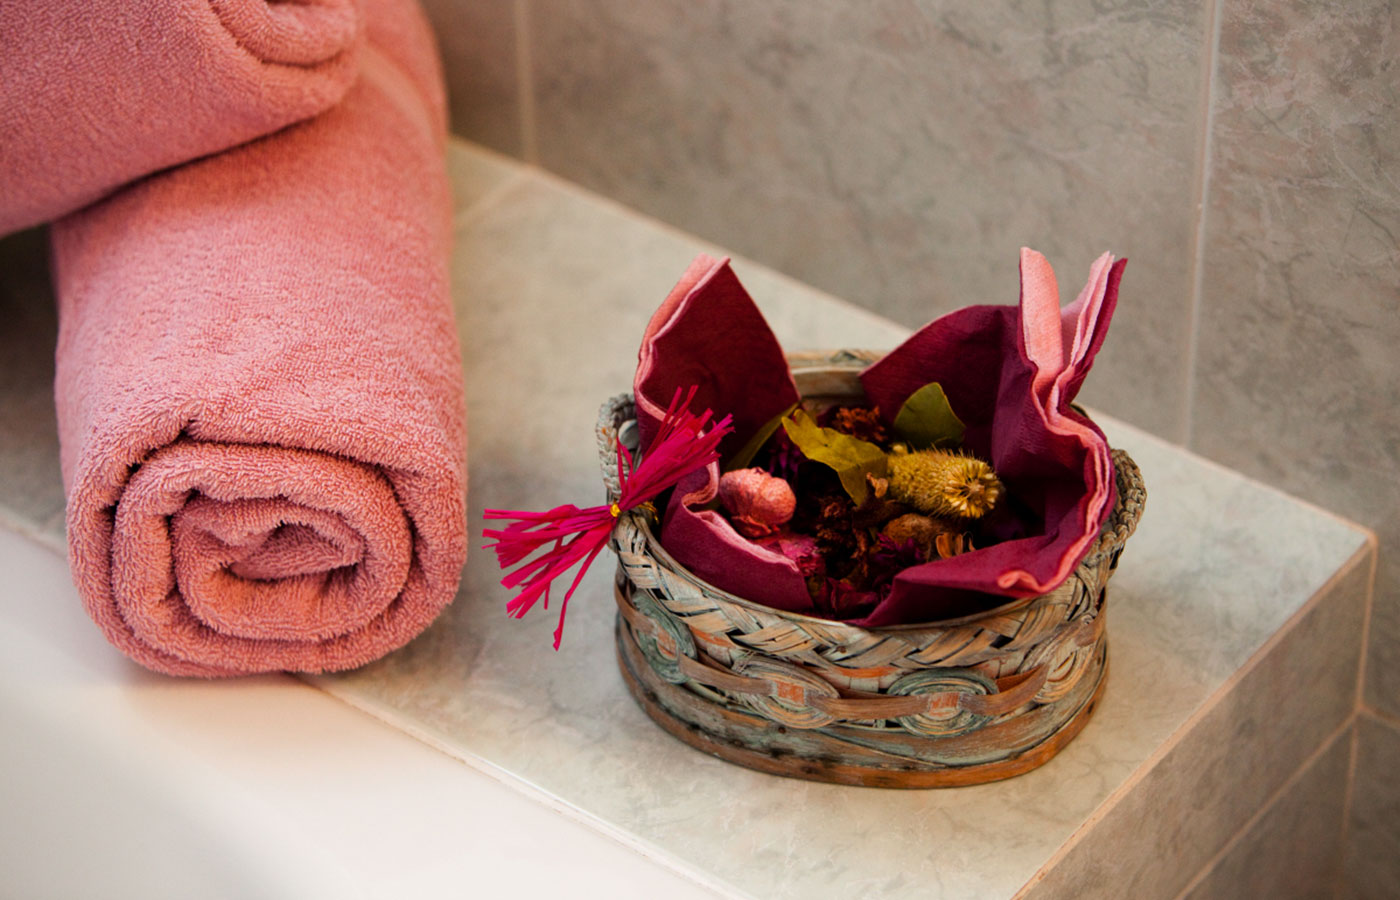 Detail of the bathroom with towels and fragrant potpourri